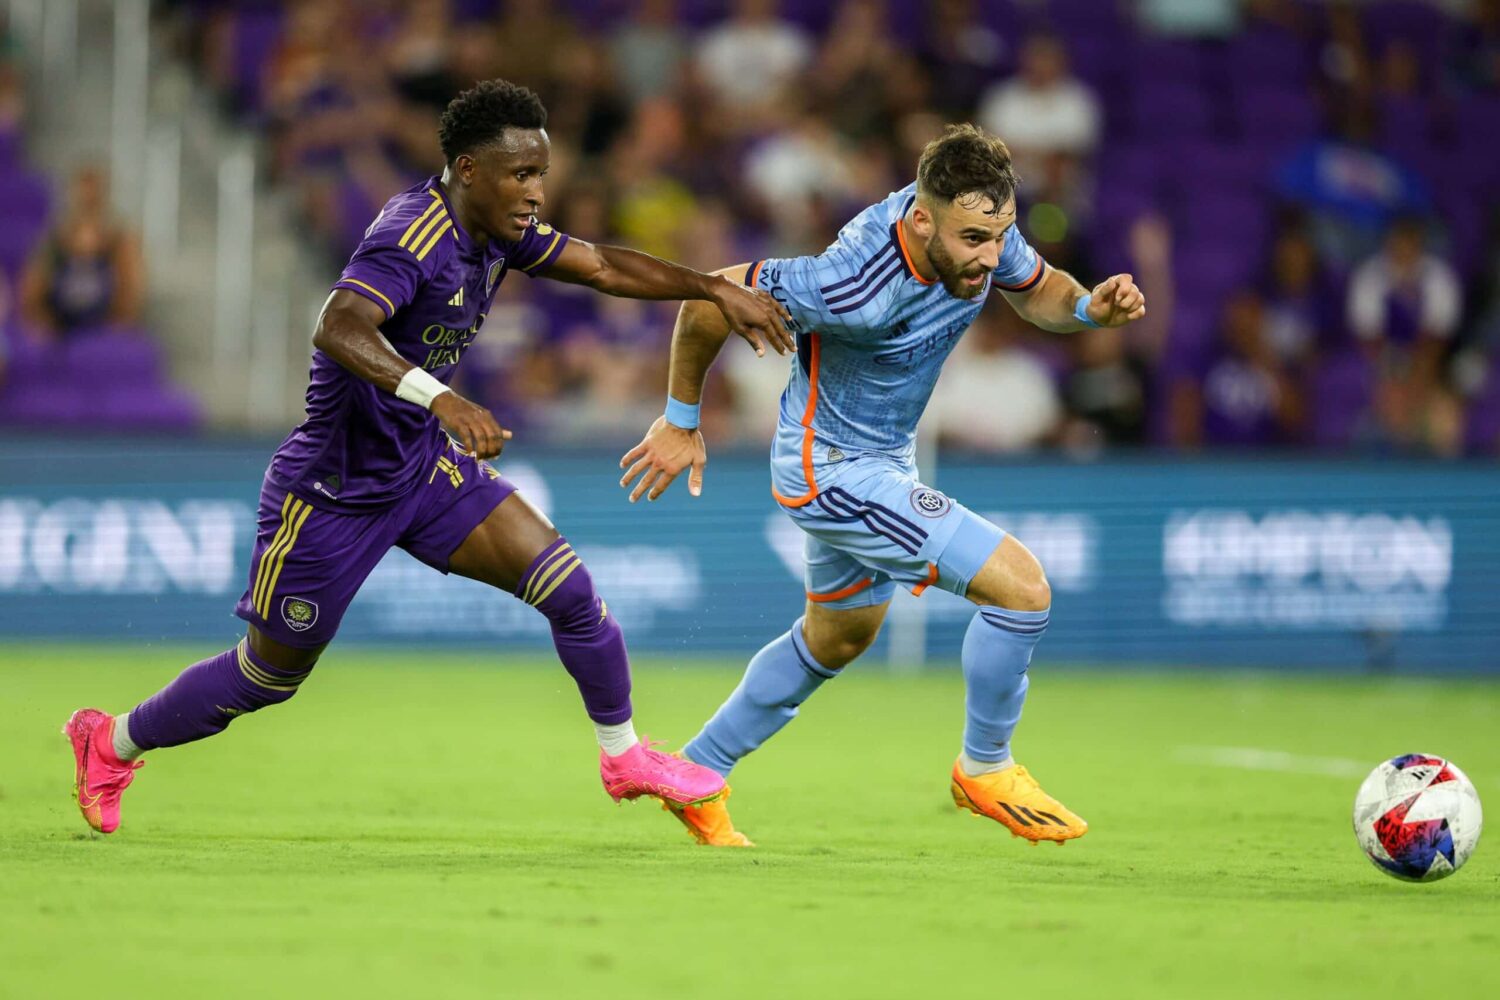 New York City FC forward Kevin O'Toole (22) controls the ball from Orlando City SC forward Ivan Angulo (77) in the second half at Exploria Stadium.